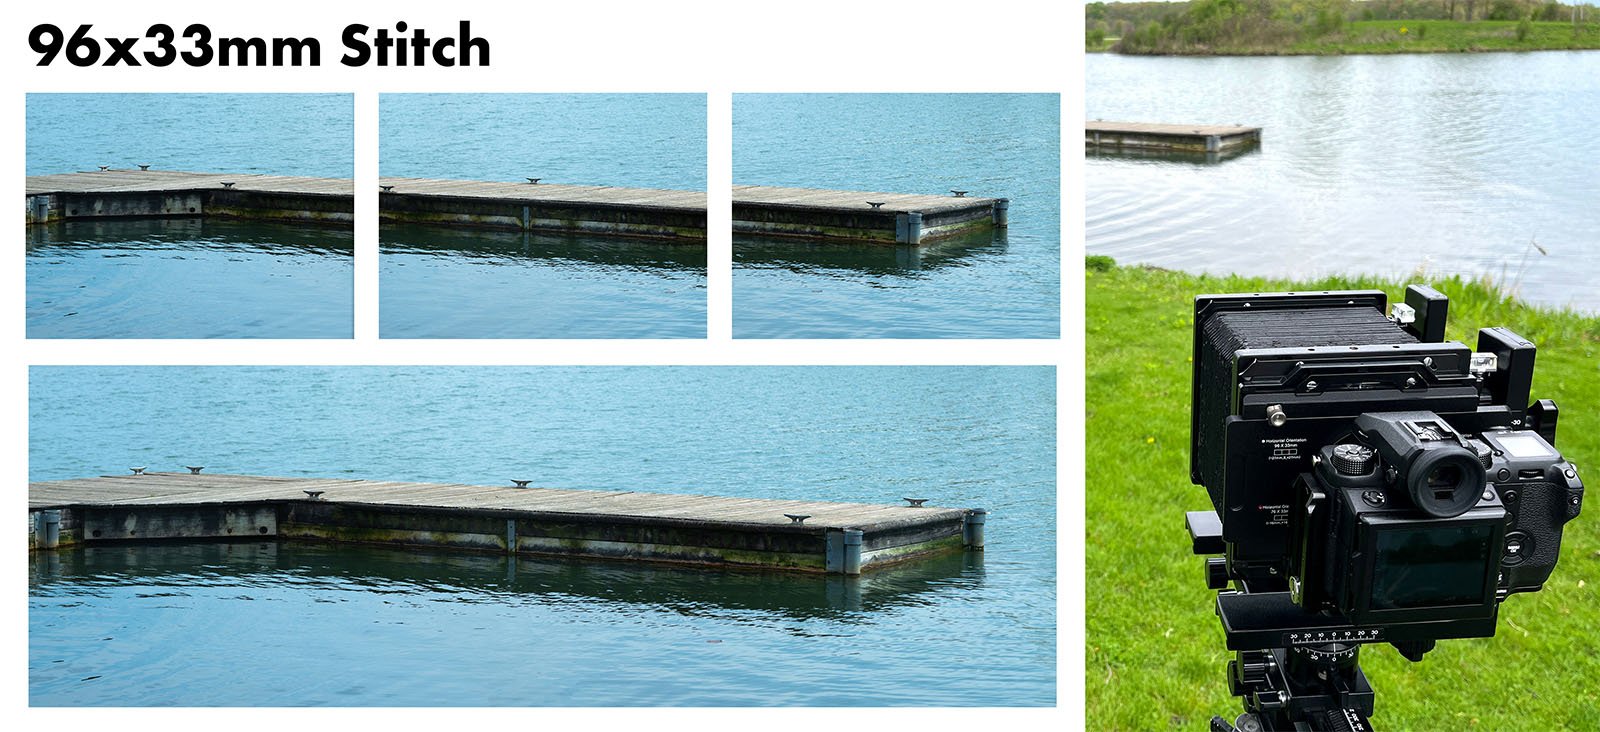 A series of three images showing a wooden dock on a lake, each focusing on different sections of the dock, beside a large-format camera set up on a tripod aimed at the scene.